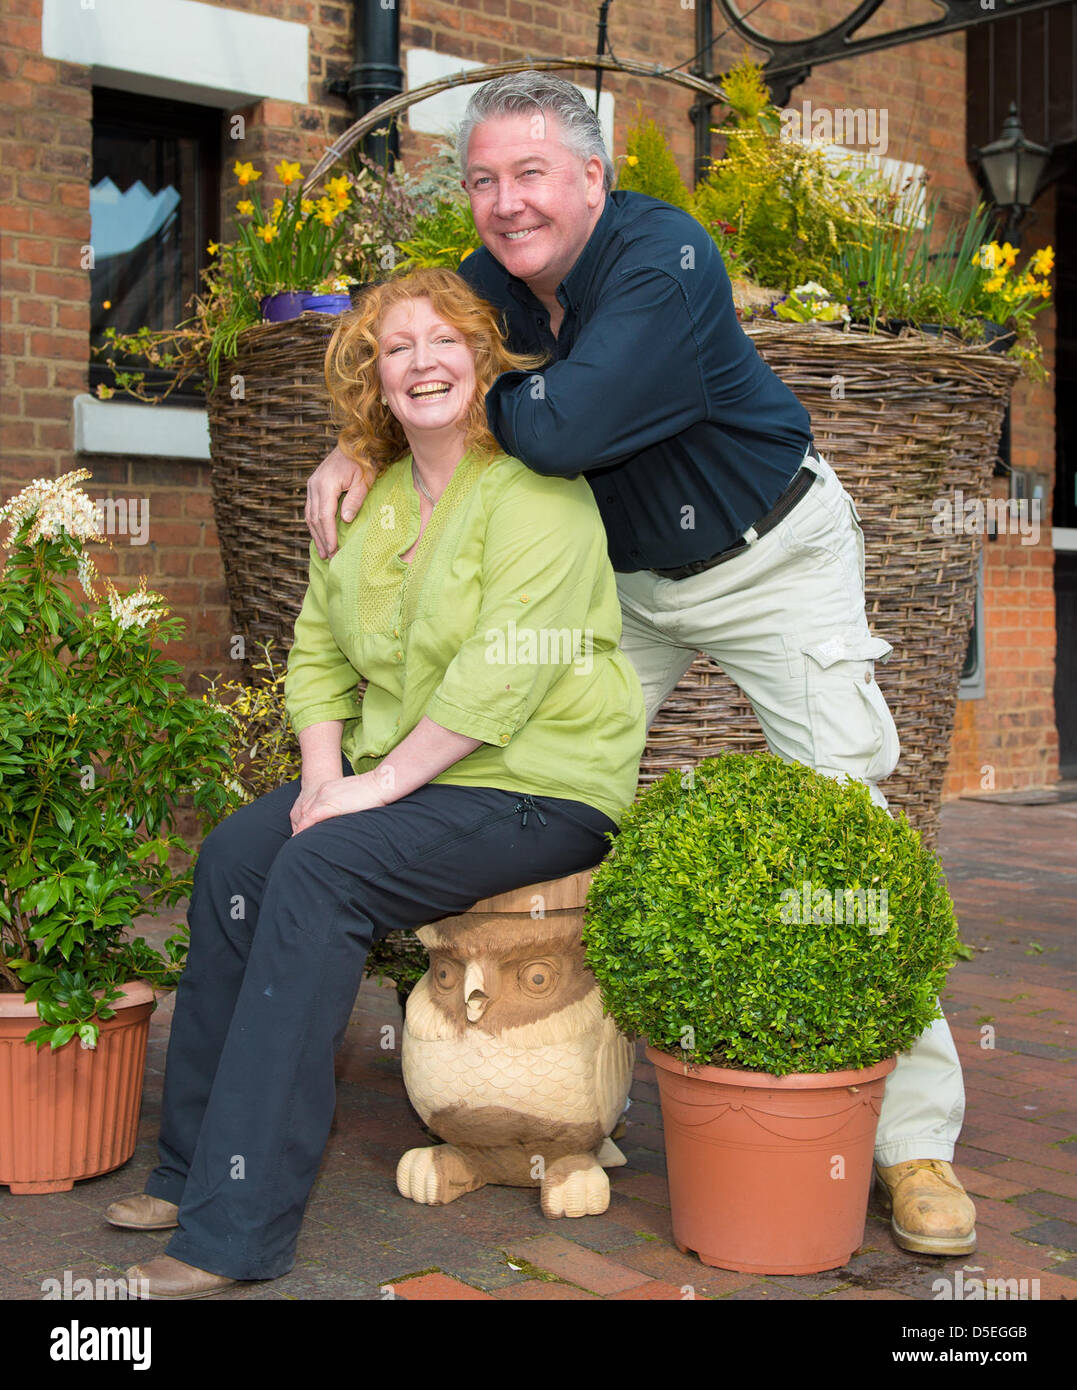 Picture By: Charlie Bryan Picture :Gloucester UK. TV Presenter Charlie Dimmock and Tommy Walsh attending the Home and Garden Party at Gloucester Quays Shopping Outlet. Date  30/03/2013 Stock Photo